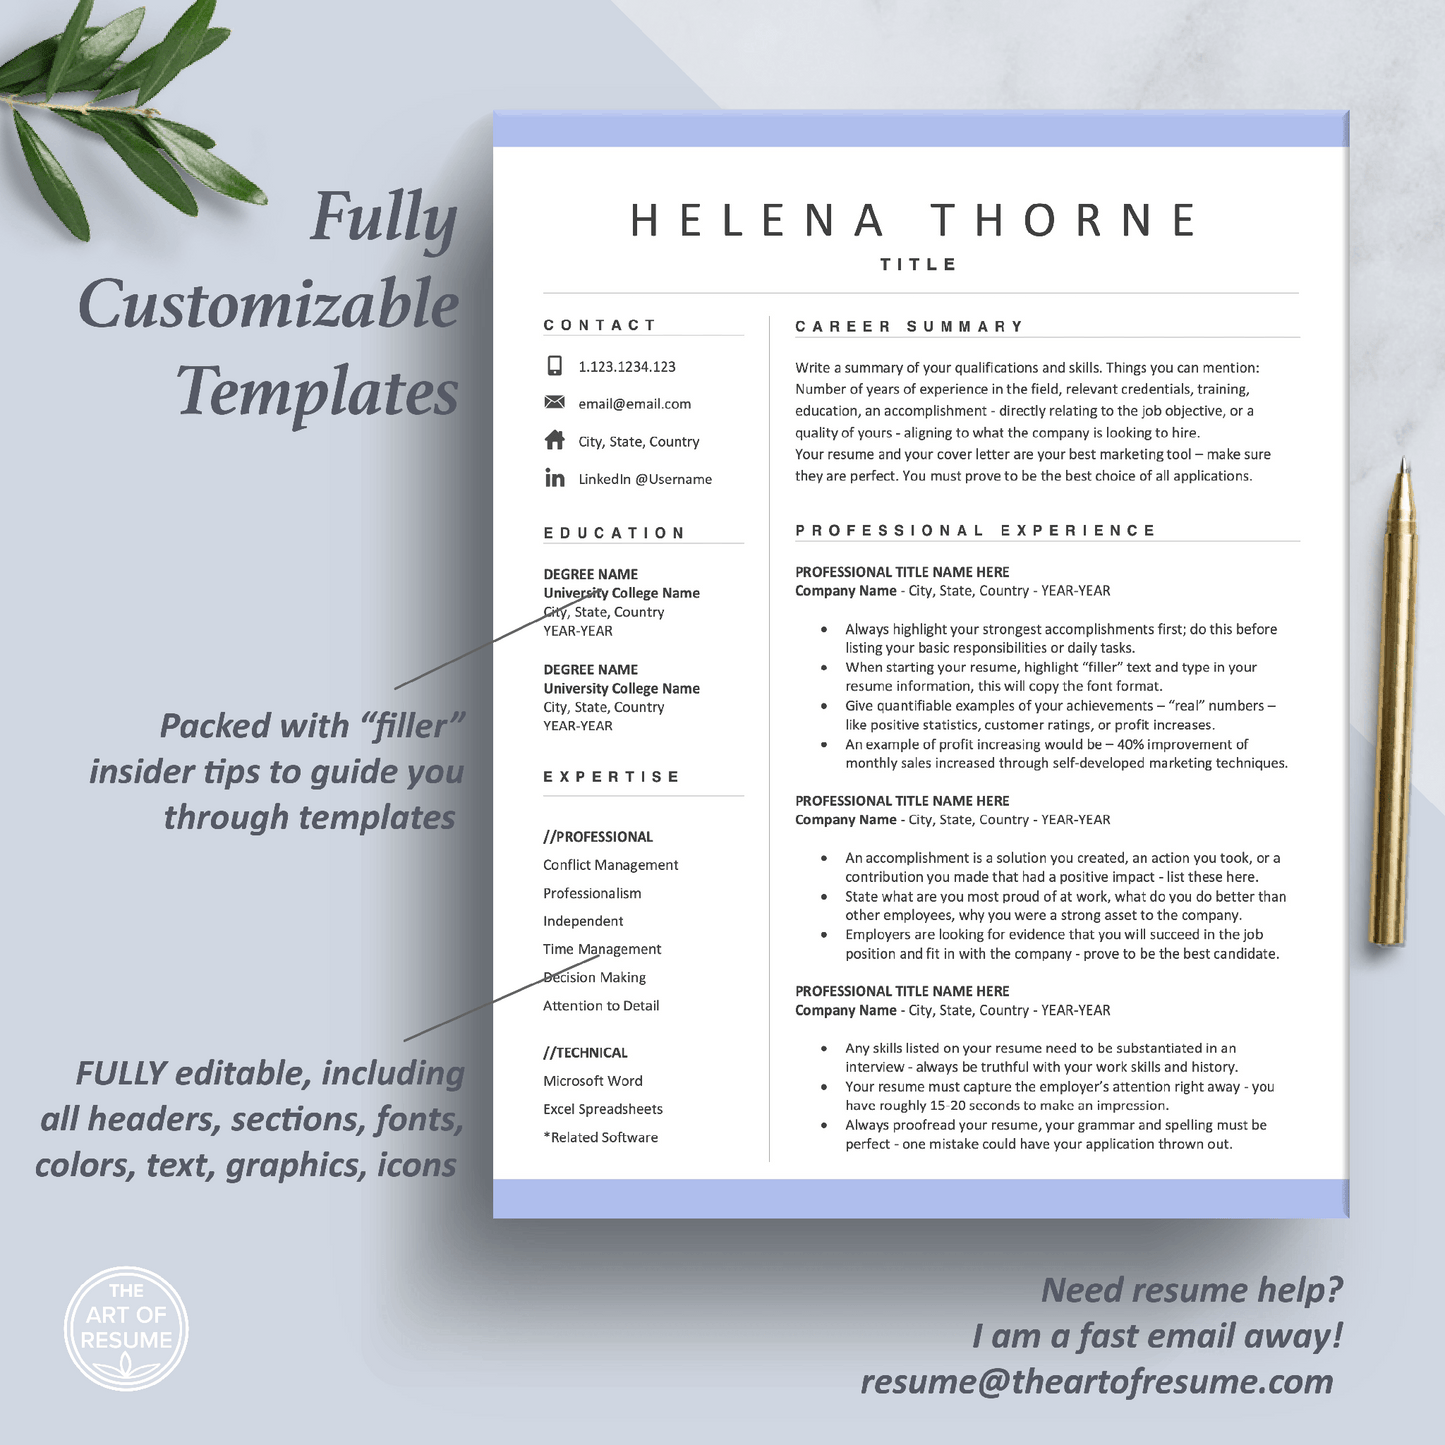 The Art of Resume Templates | One Page Professional Resume CV Design Template Maker | Curriculum Vitae